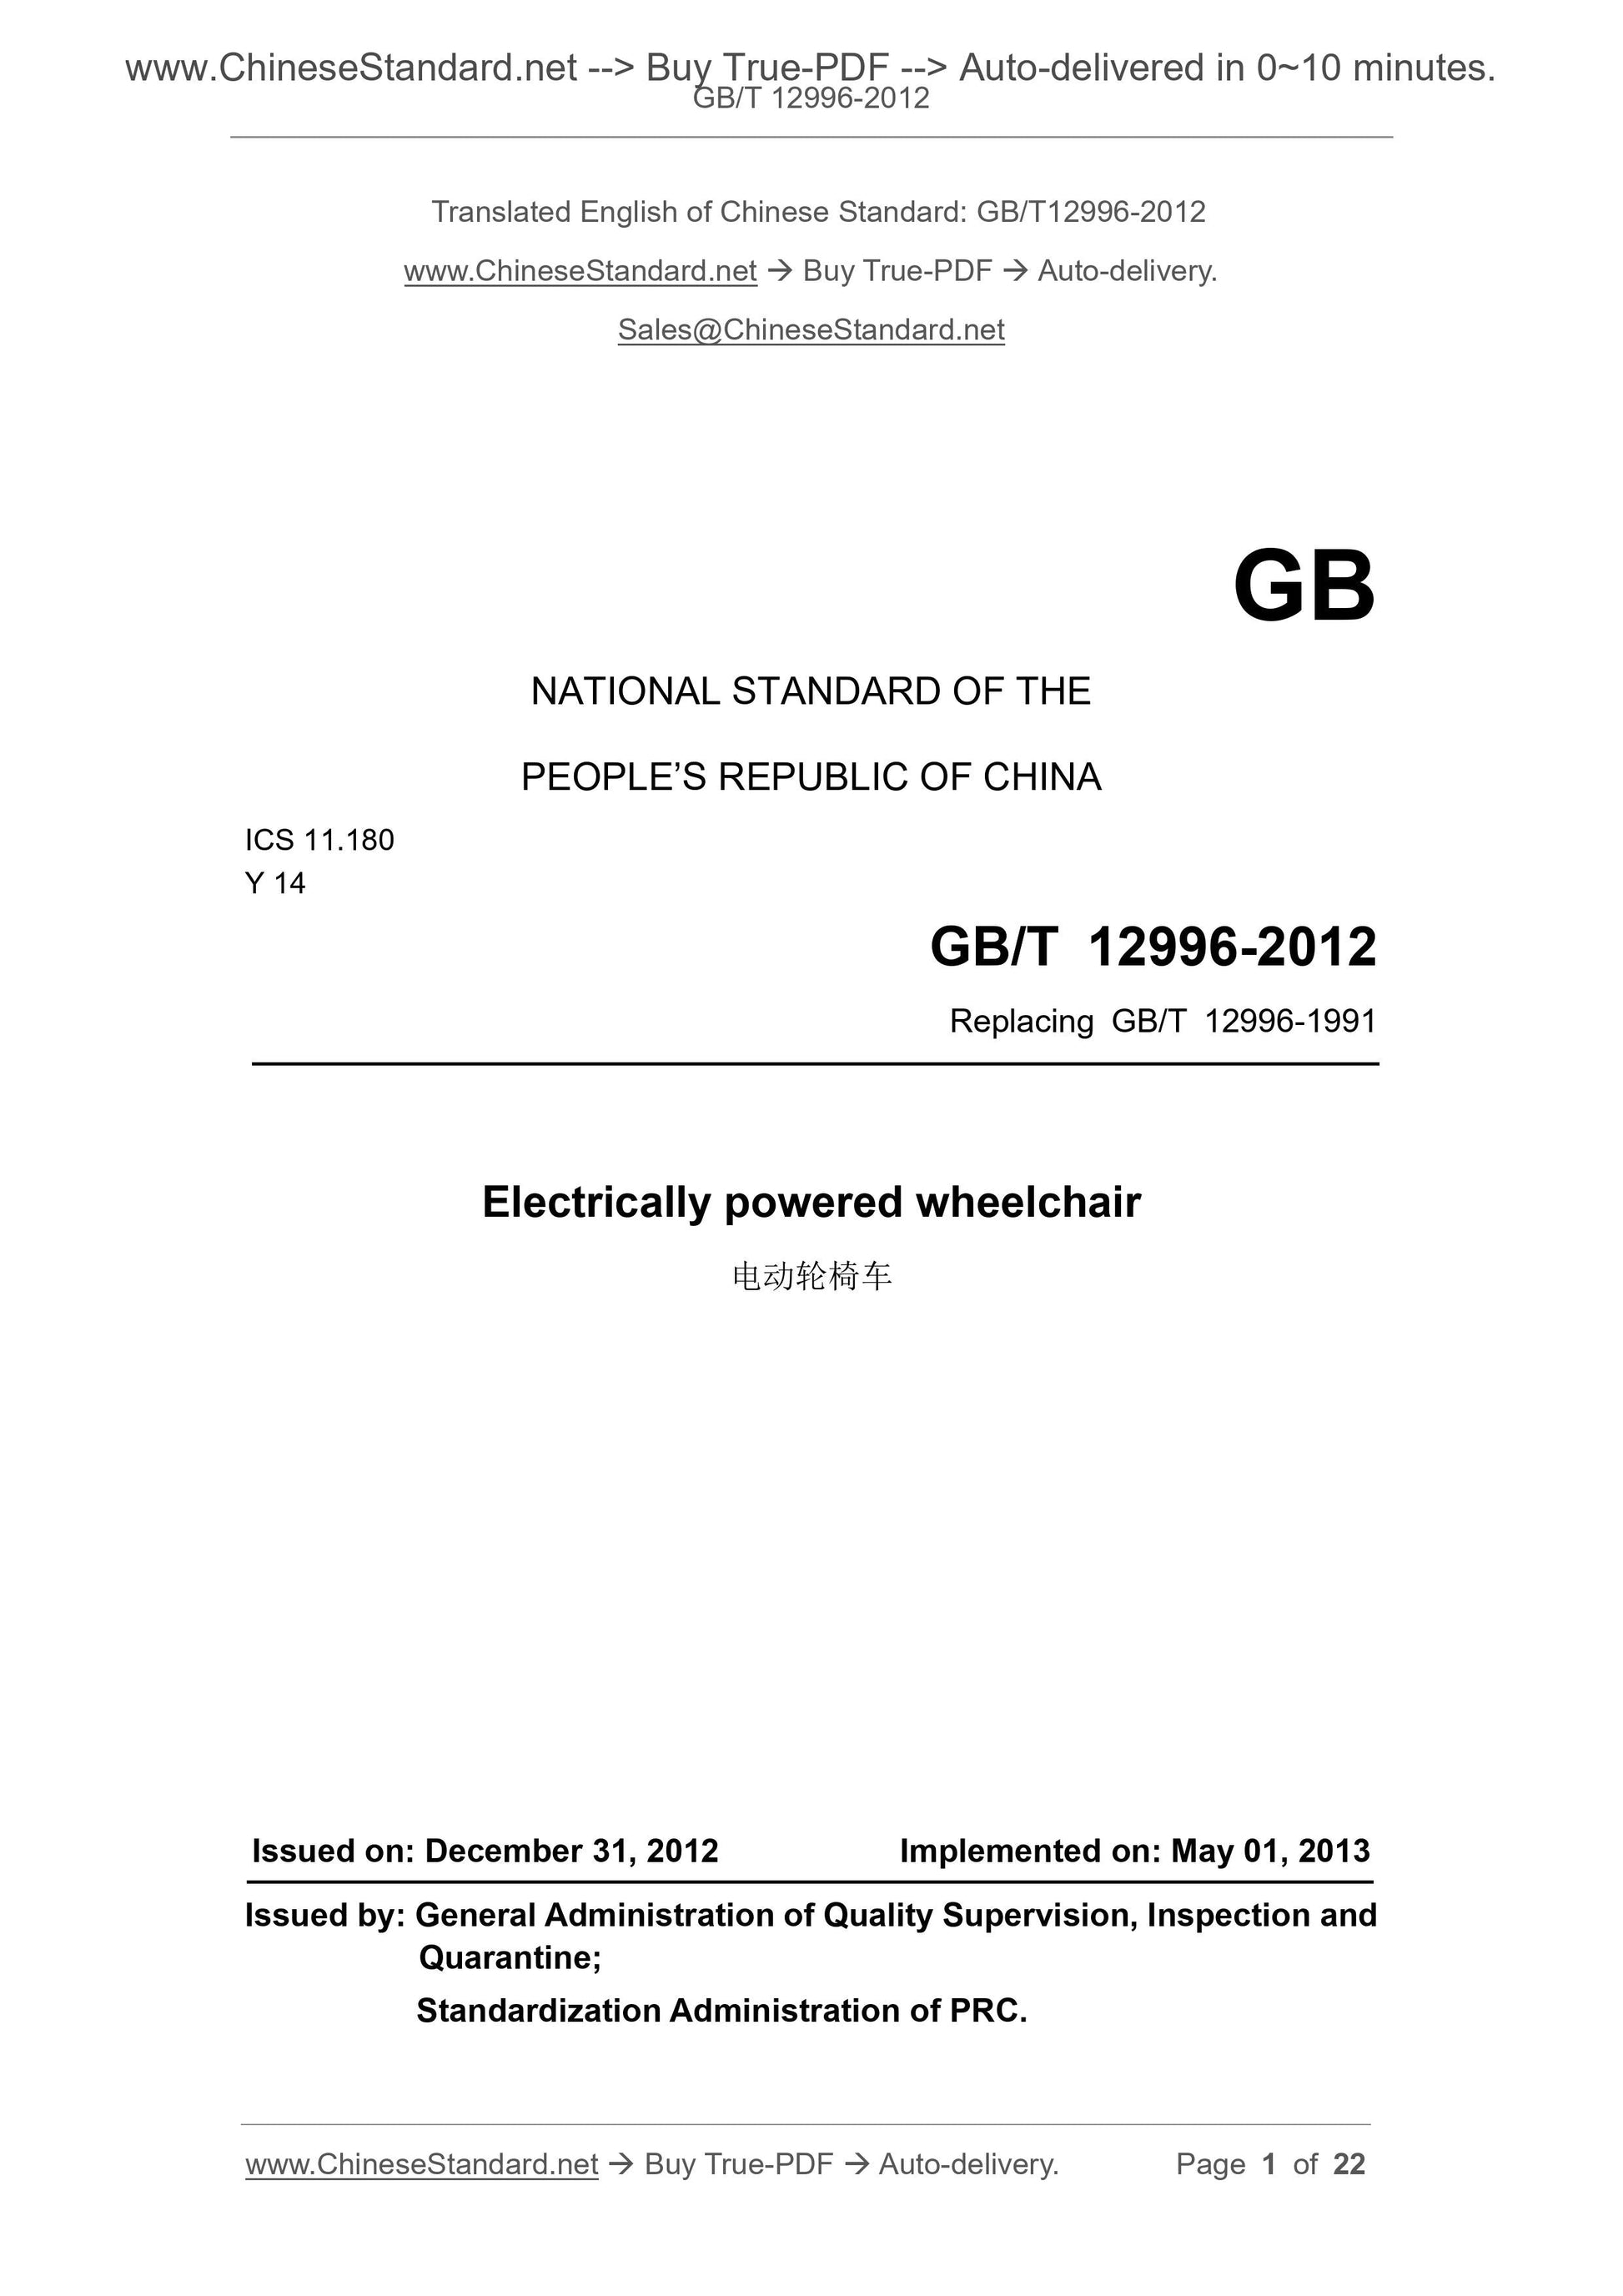 GB/T 12996-2012 Page 1